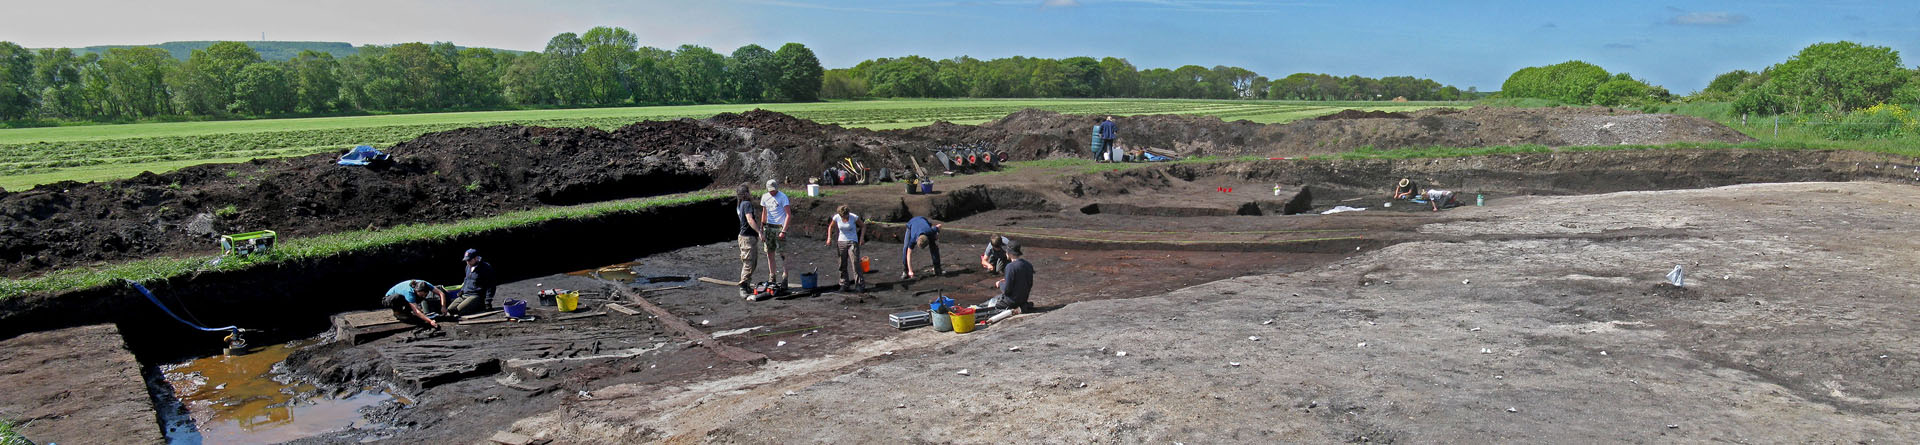 Colour photograph showing lots of archaeologists digging in a trench with spoilheaps behind; some timbers are visible left